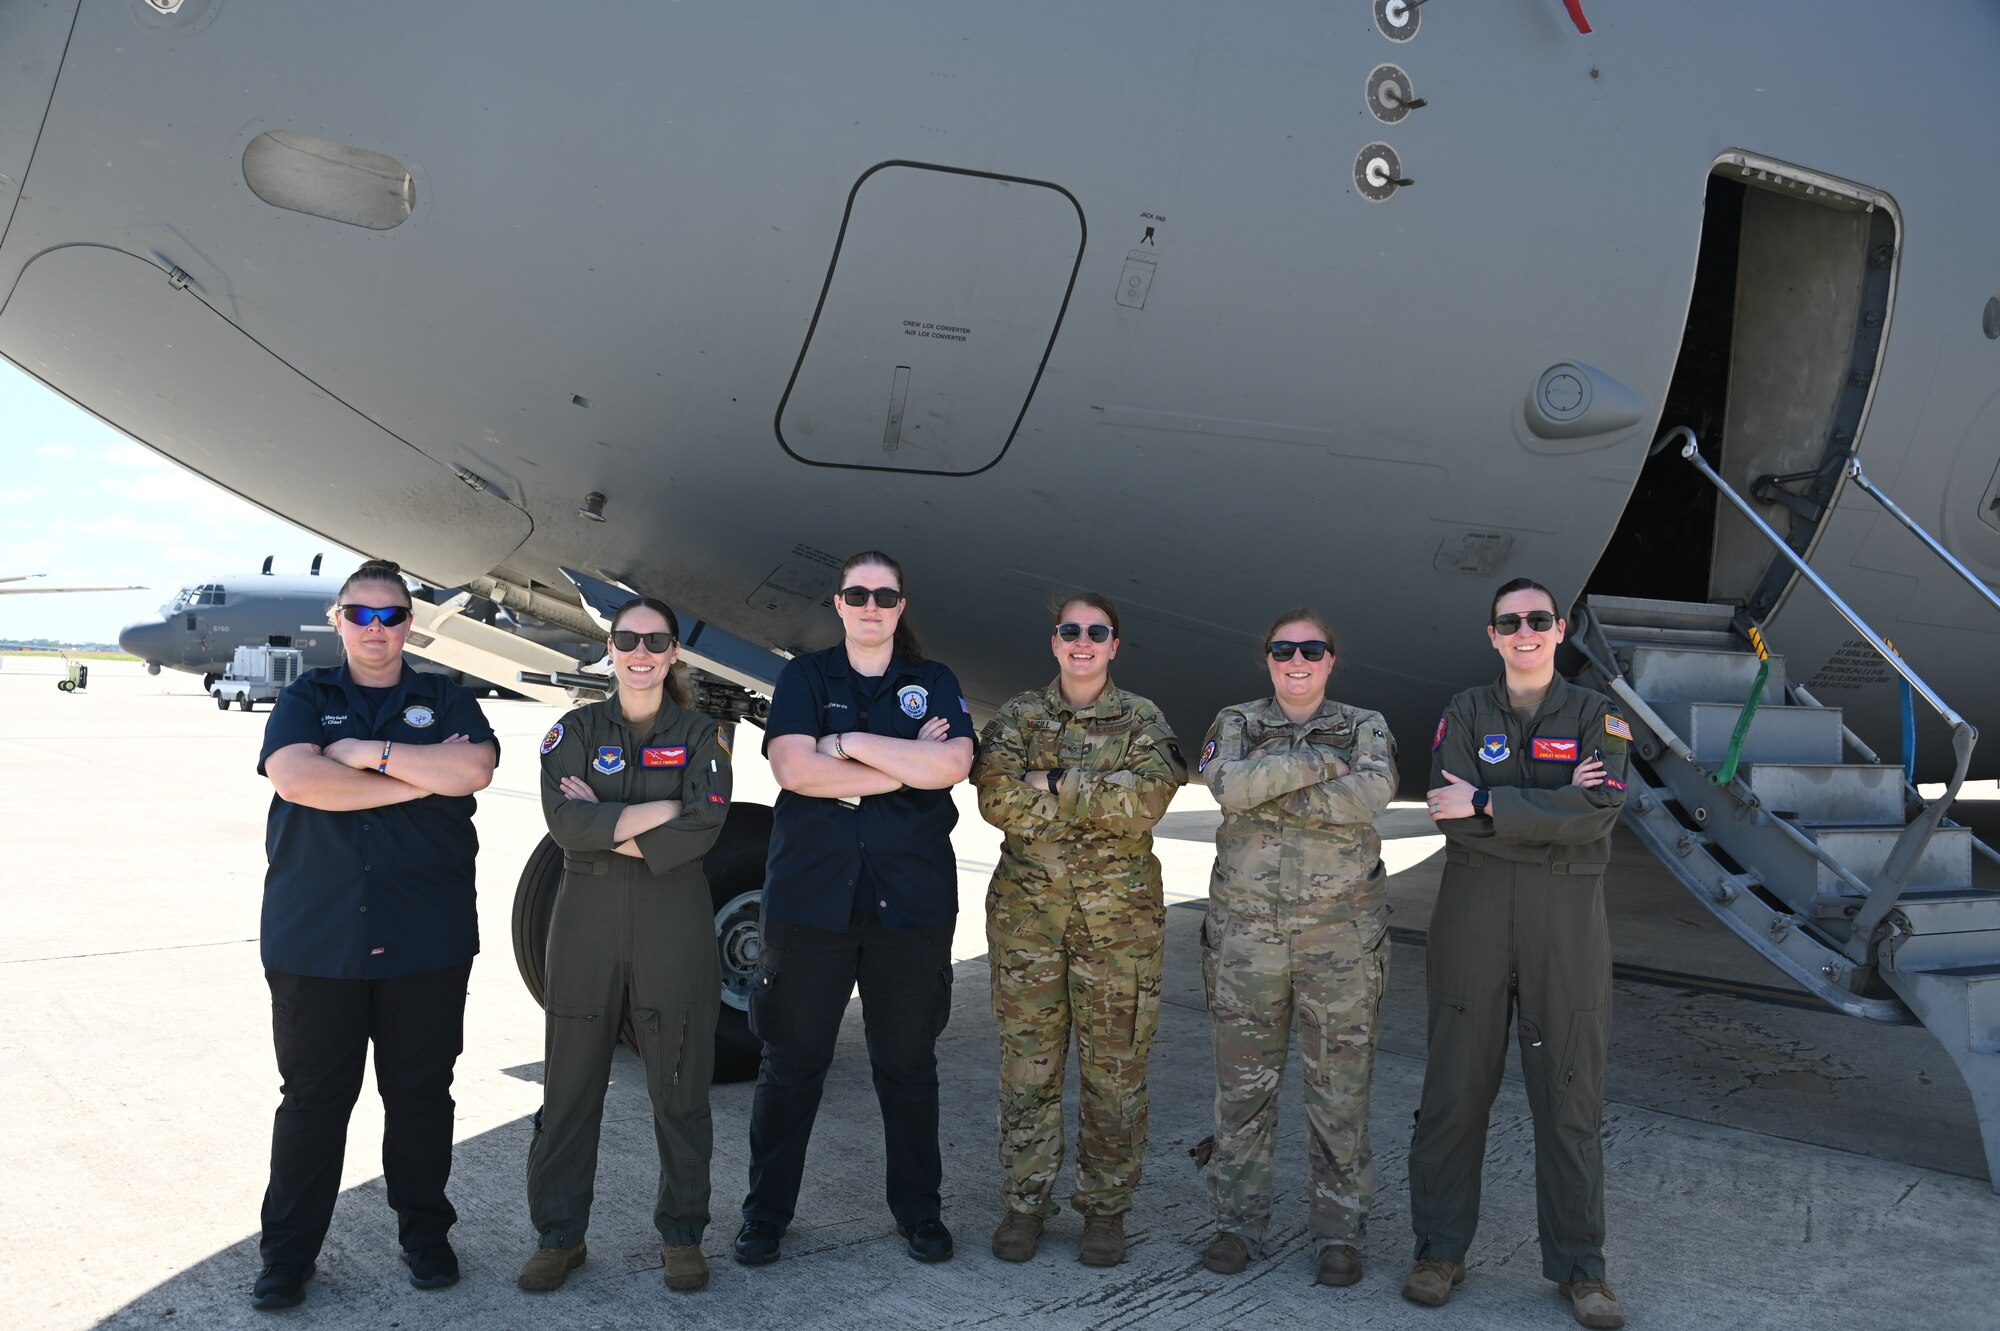 Aircrew from the 97th Air Mobility Wing gather for a photo in front of a C-17 Globemaster III at the Torch Athena Fly-In held in San Antonio Texas, Sept. 21, 2023. The event gave attendees an opportunity to experience diverse aviation career fields and empowered all women to be the best versions of themselves. (U.S. Air Force photo by Airman 1st Class Heidi Bucins)